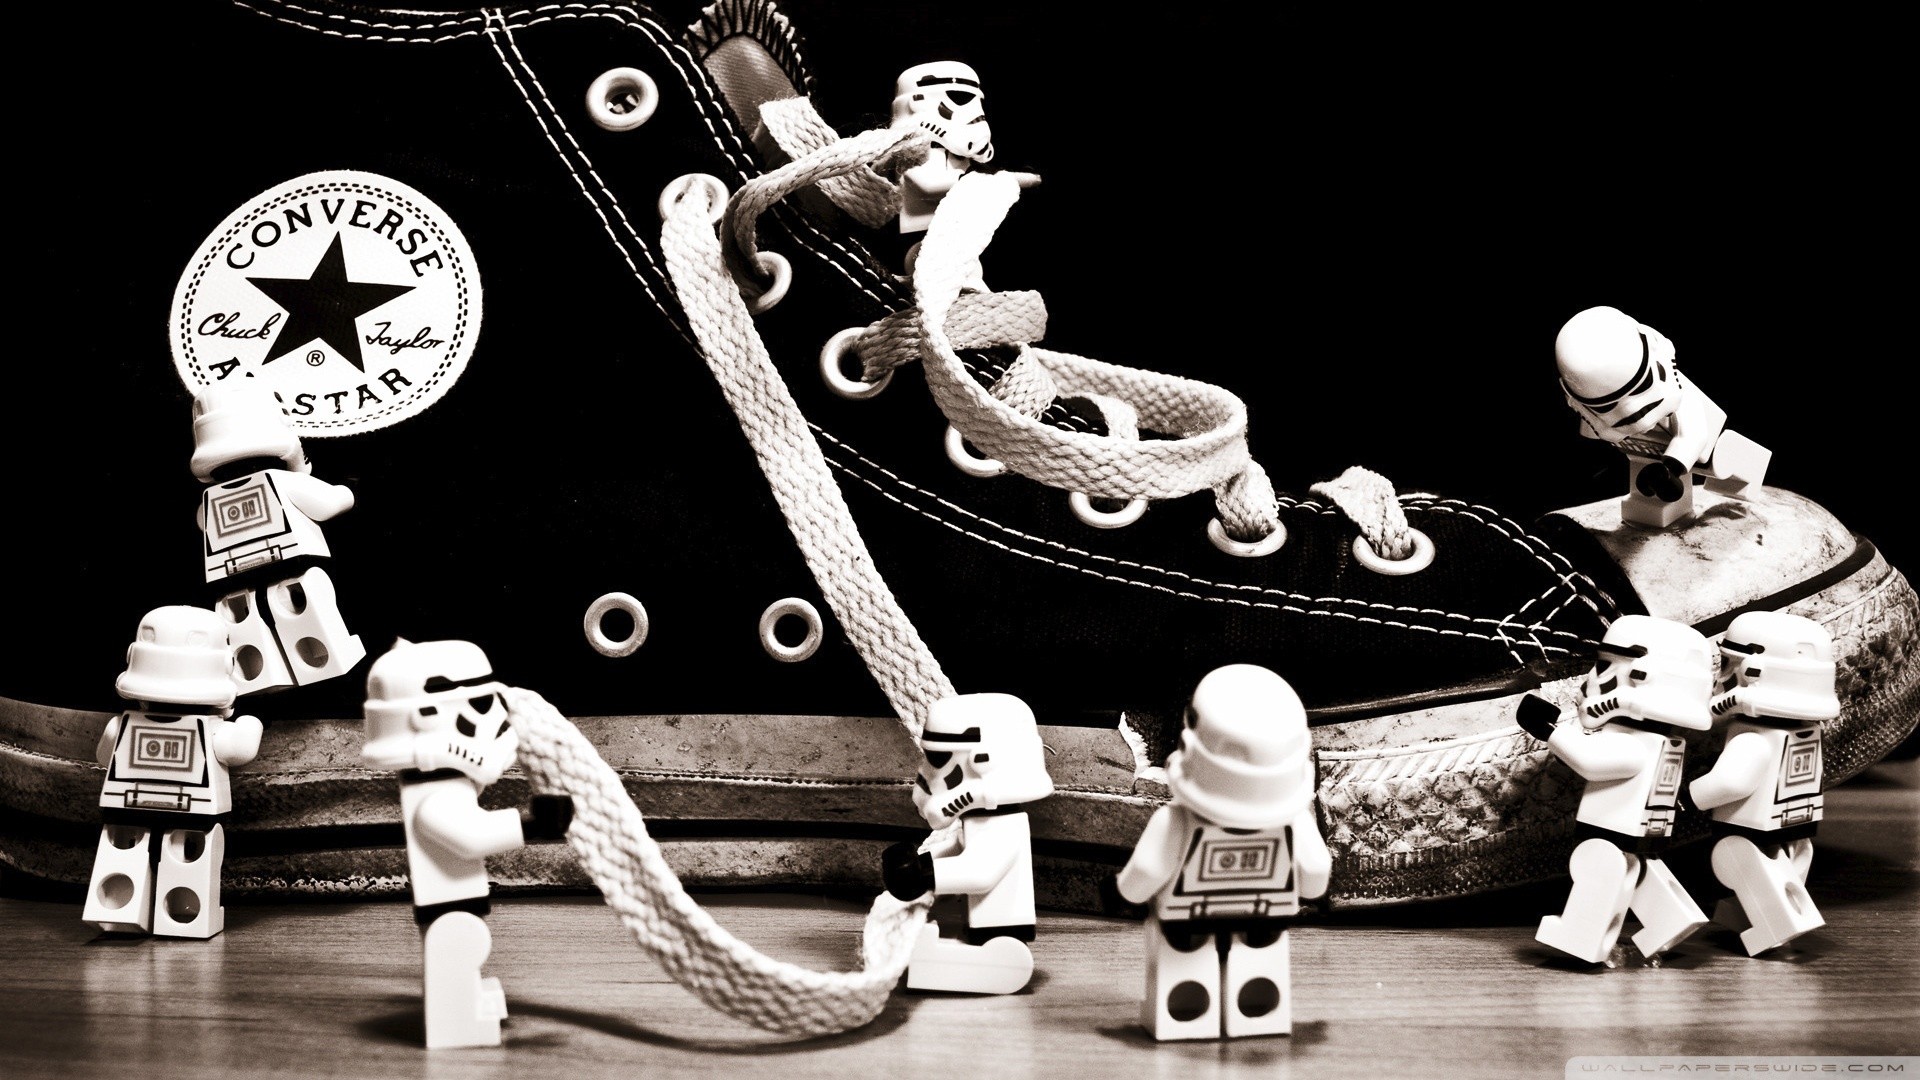 General 1920x1080 Converse shoes stormtrooper LEGO Star Wars Star Wars Humor toys sepia Imperial Forces figurines humor